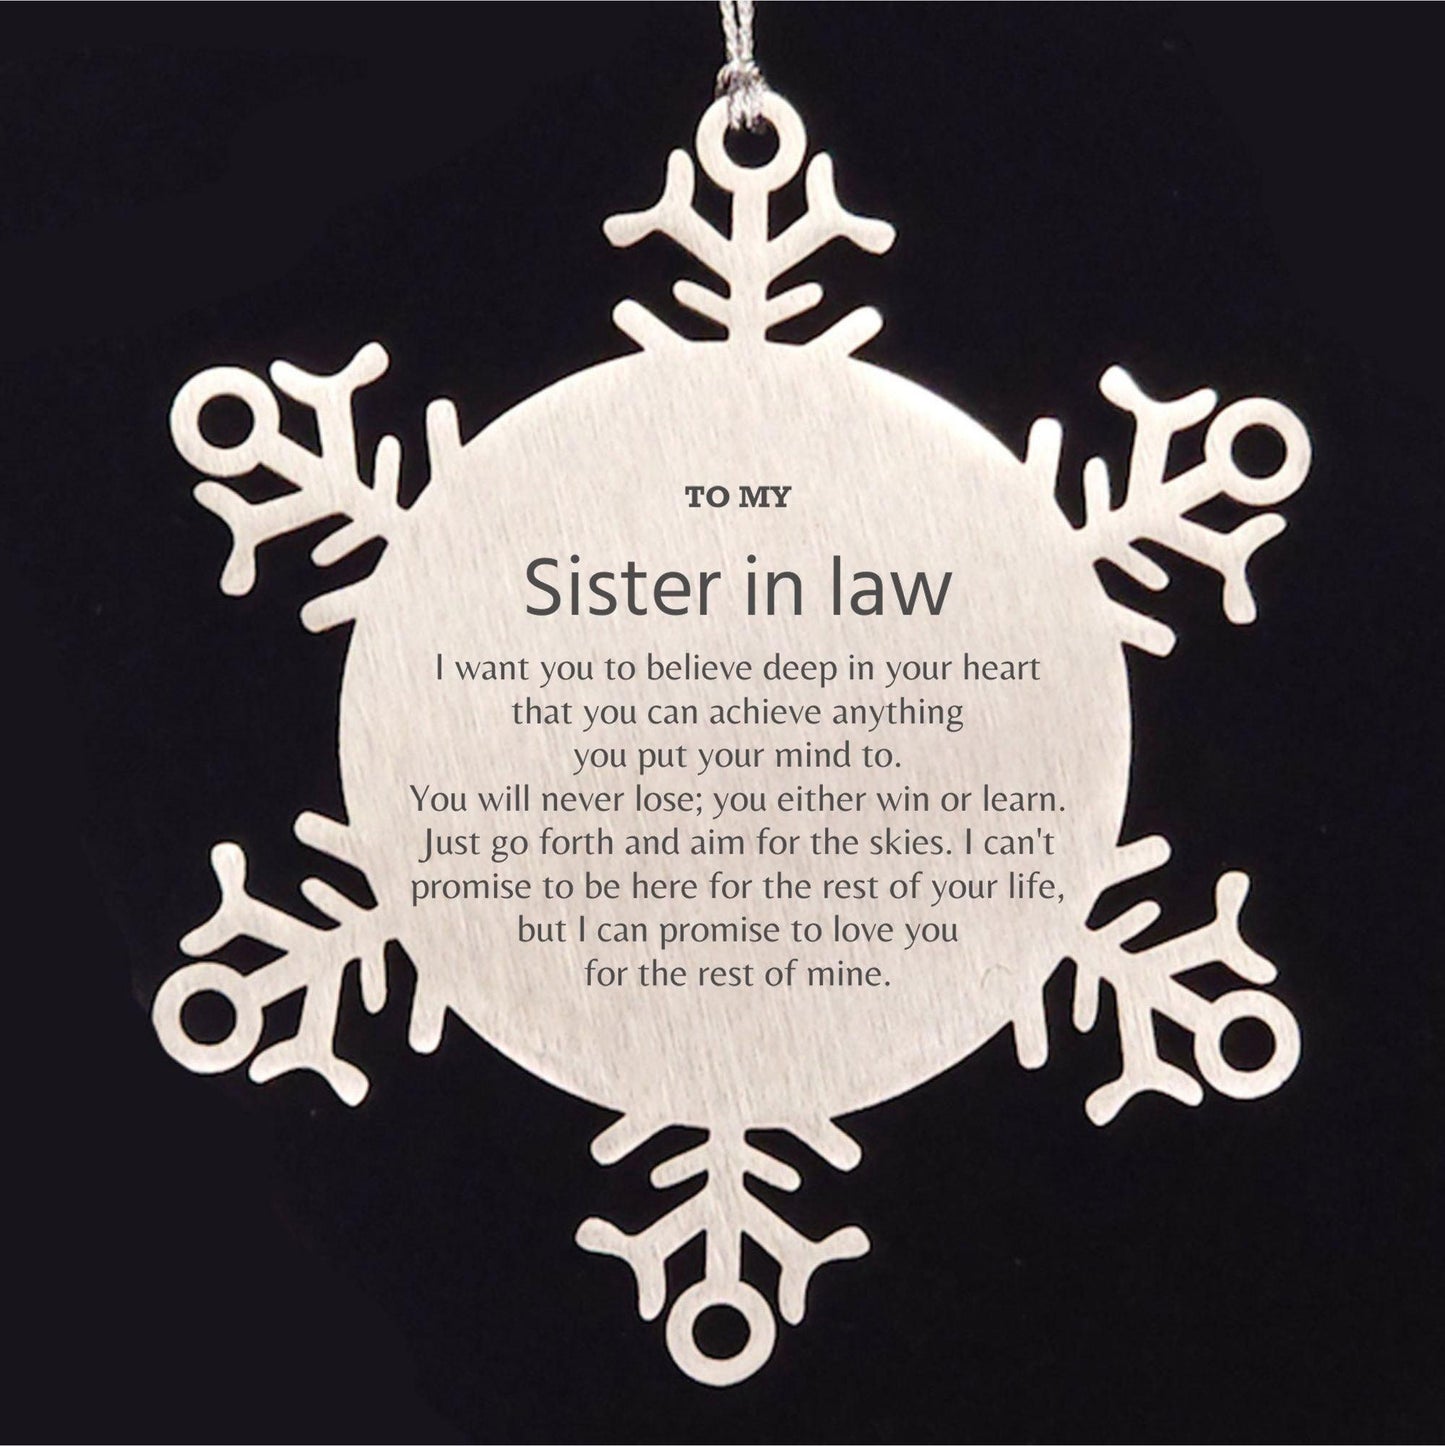 Motivational Sister In Law Snowflake Ornament, Sister In Law I can promise to love you for the rest of mine, Christmas Ornament For Sister In Law, Sister In Law Gift for Women Men - Mallard Moon Gift Shop